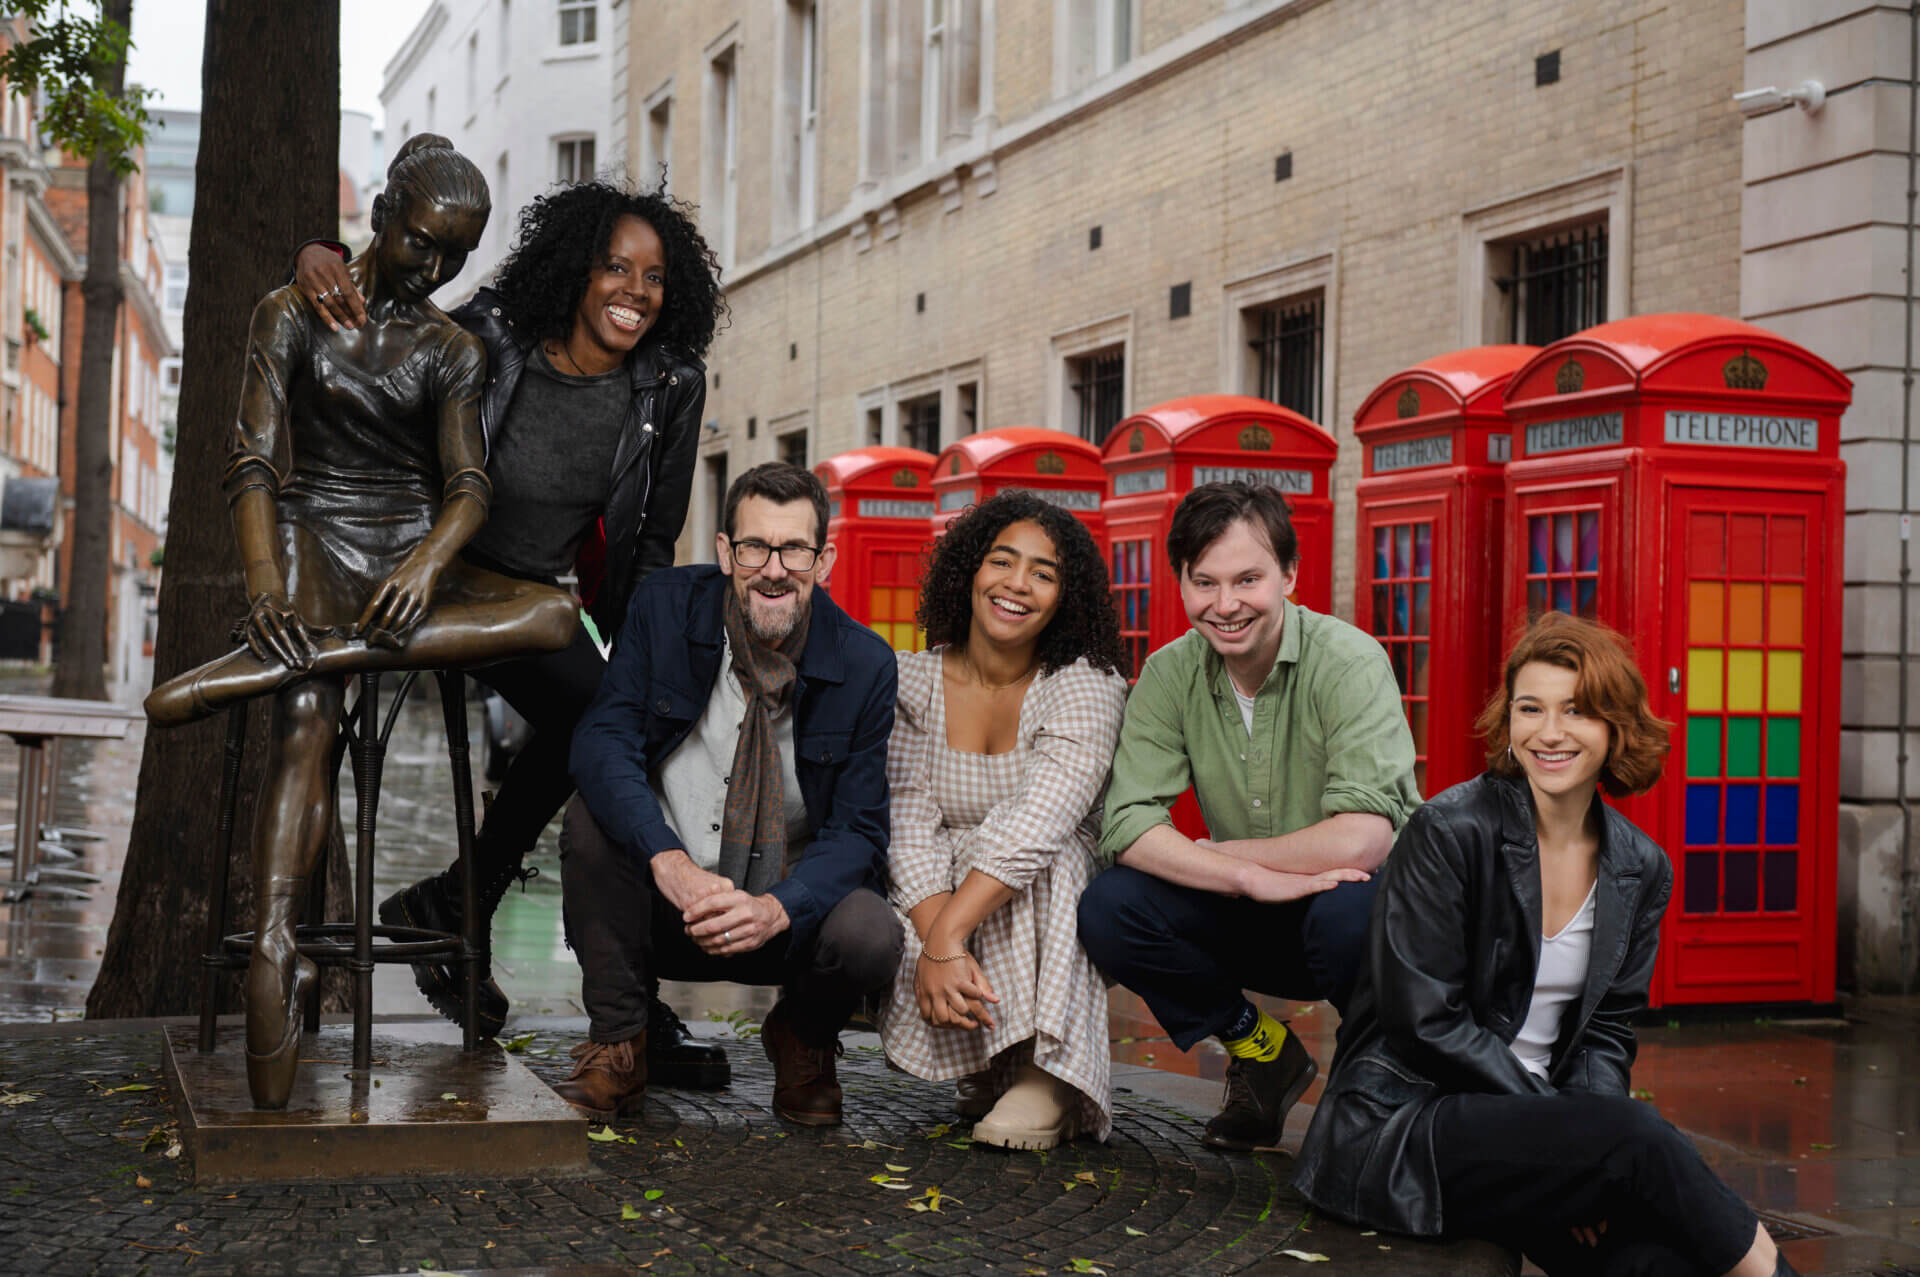 BY: Robin Savage, courtesy of Actors From The London Stage. L to R: Natasha Bain, Michael Wagg, Anna Crichlow, Sam Hill, Lucy Reynolds